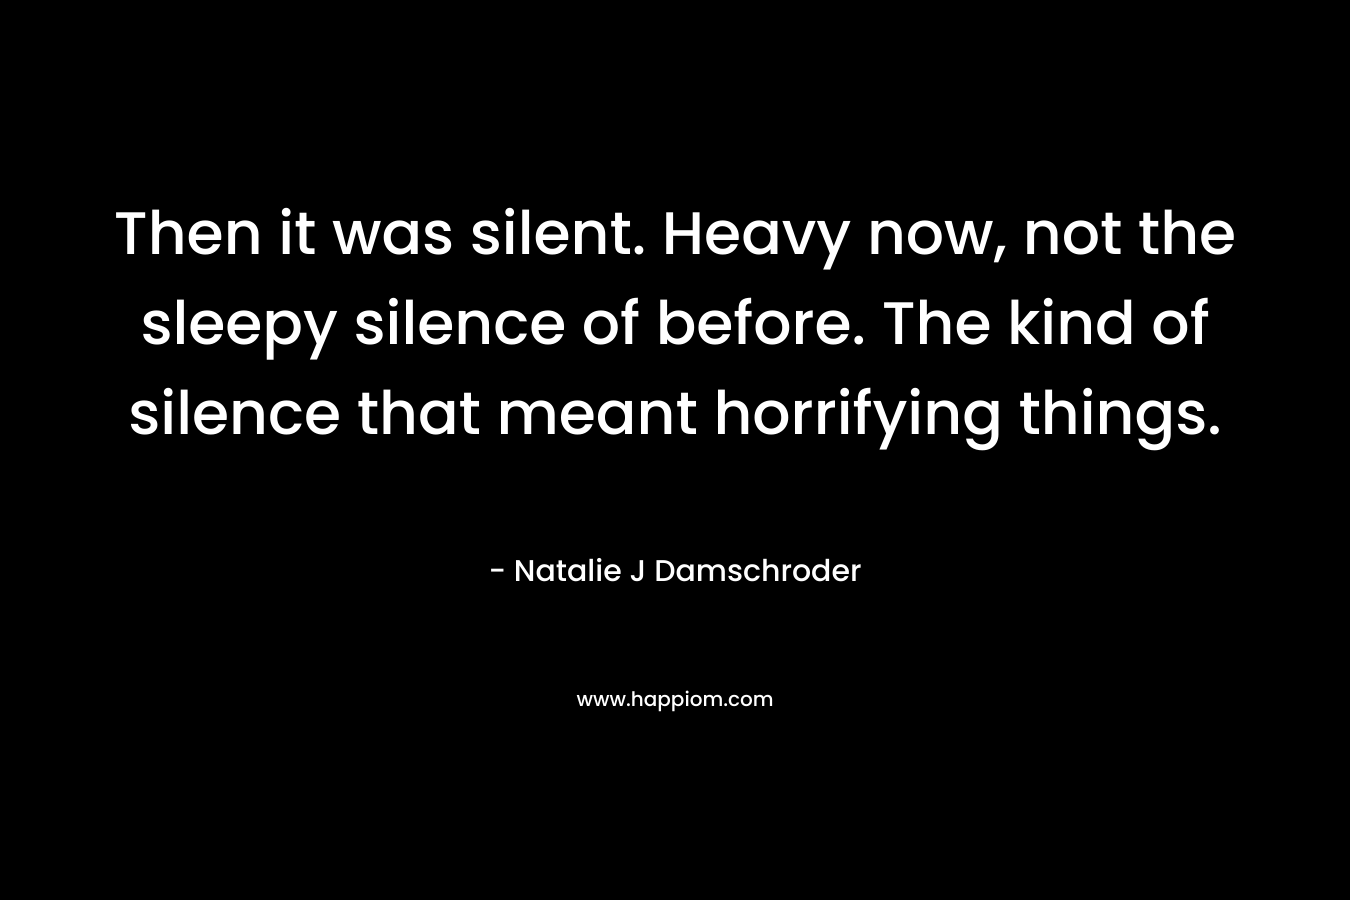 Then it was silent. Heavy now, not the sleepy silence of before. The kind of silence that meant horrifying things. – Natalie J Damschroder